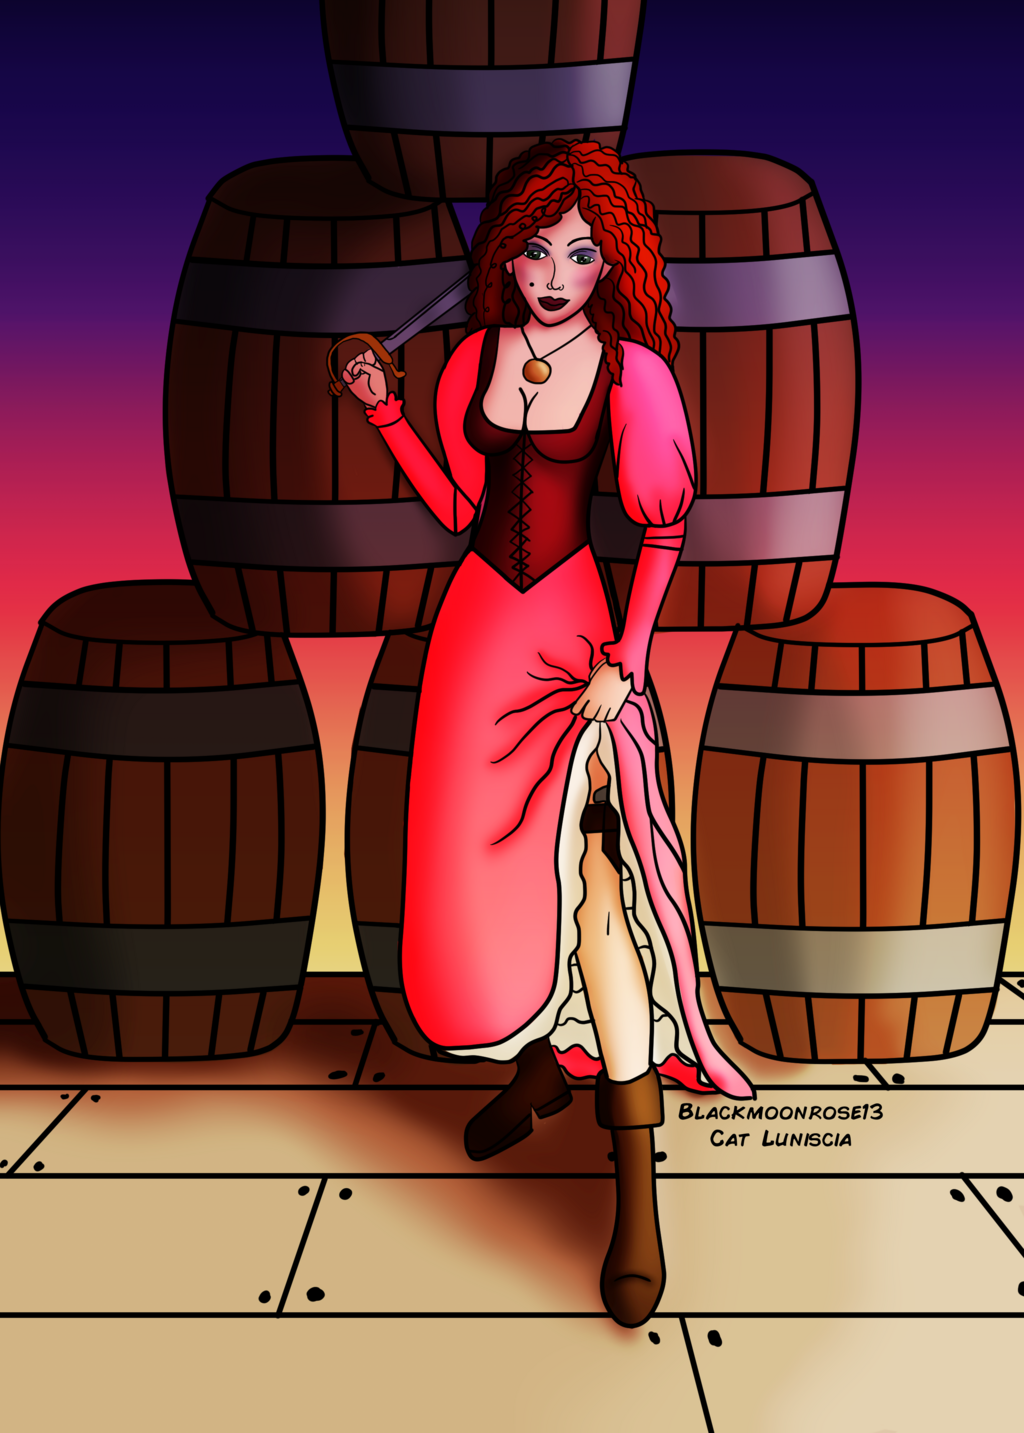 We Want's The Red Head Pirate Queen